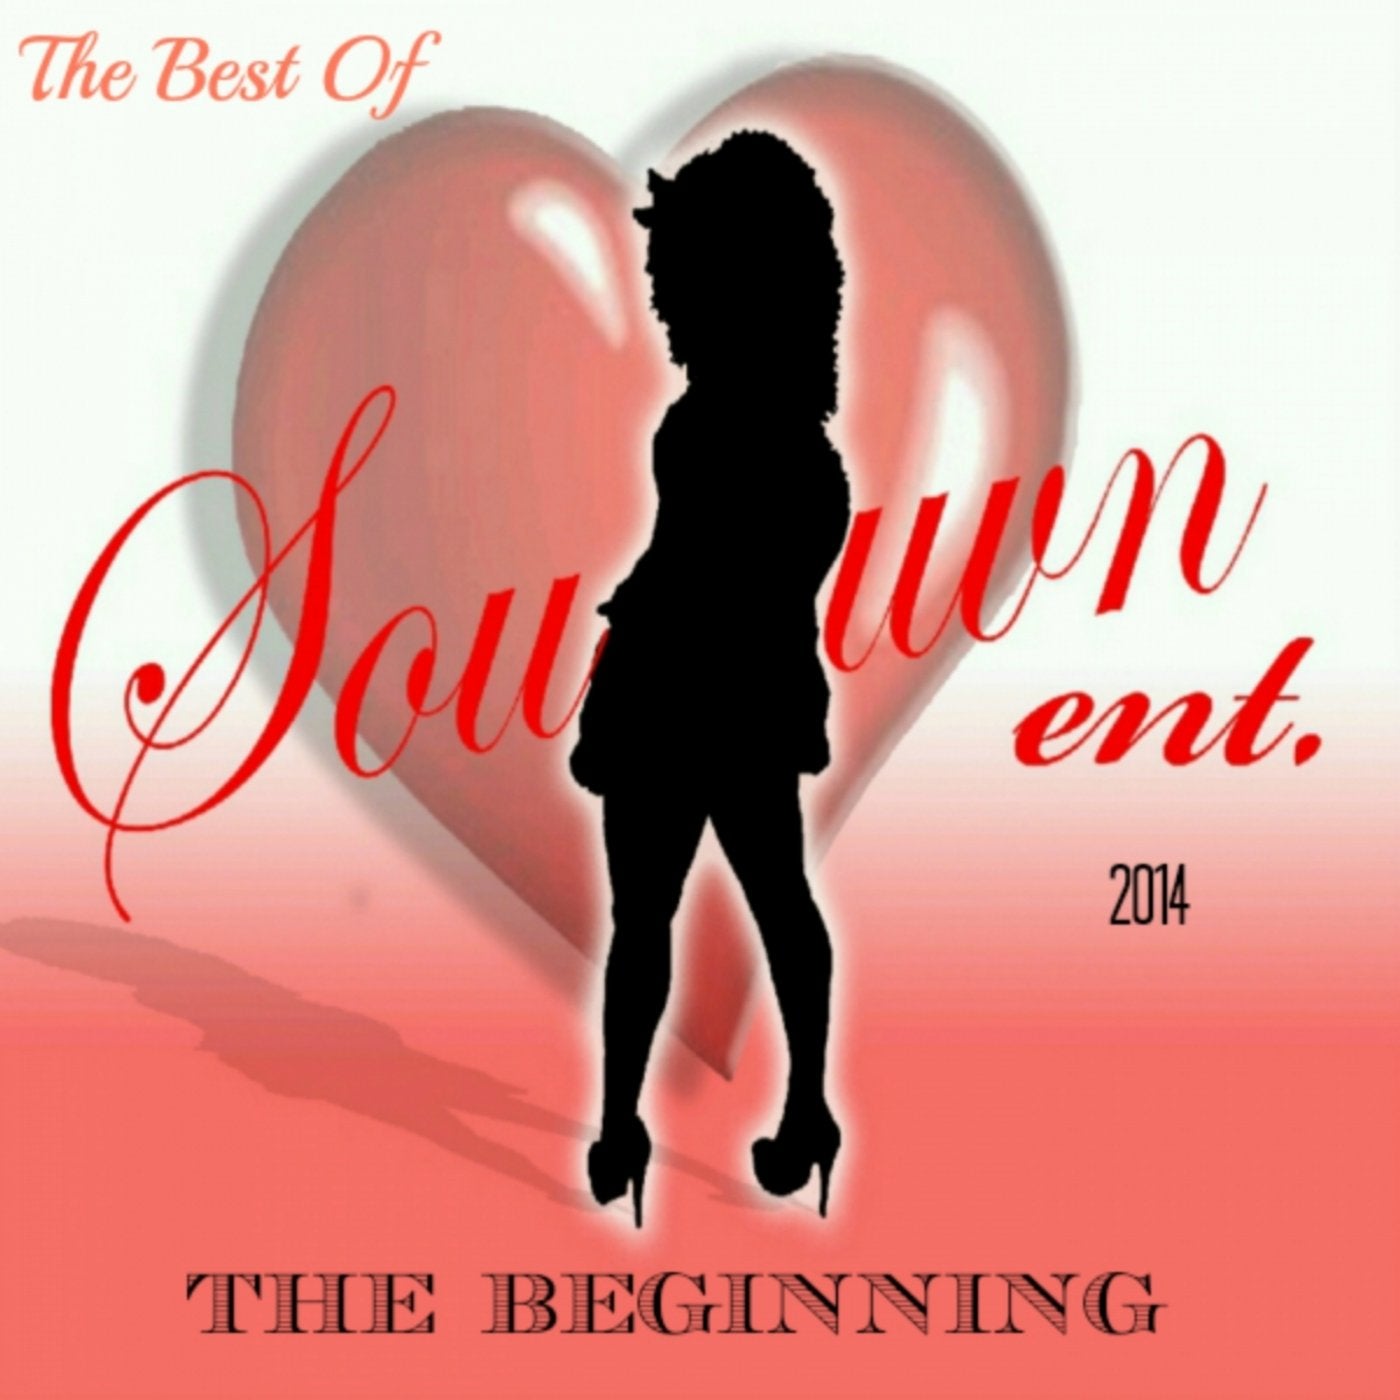 The Best Of Souluvn Ent 2014 "The Beginning"